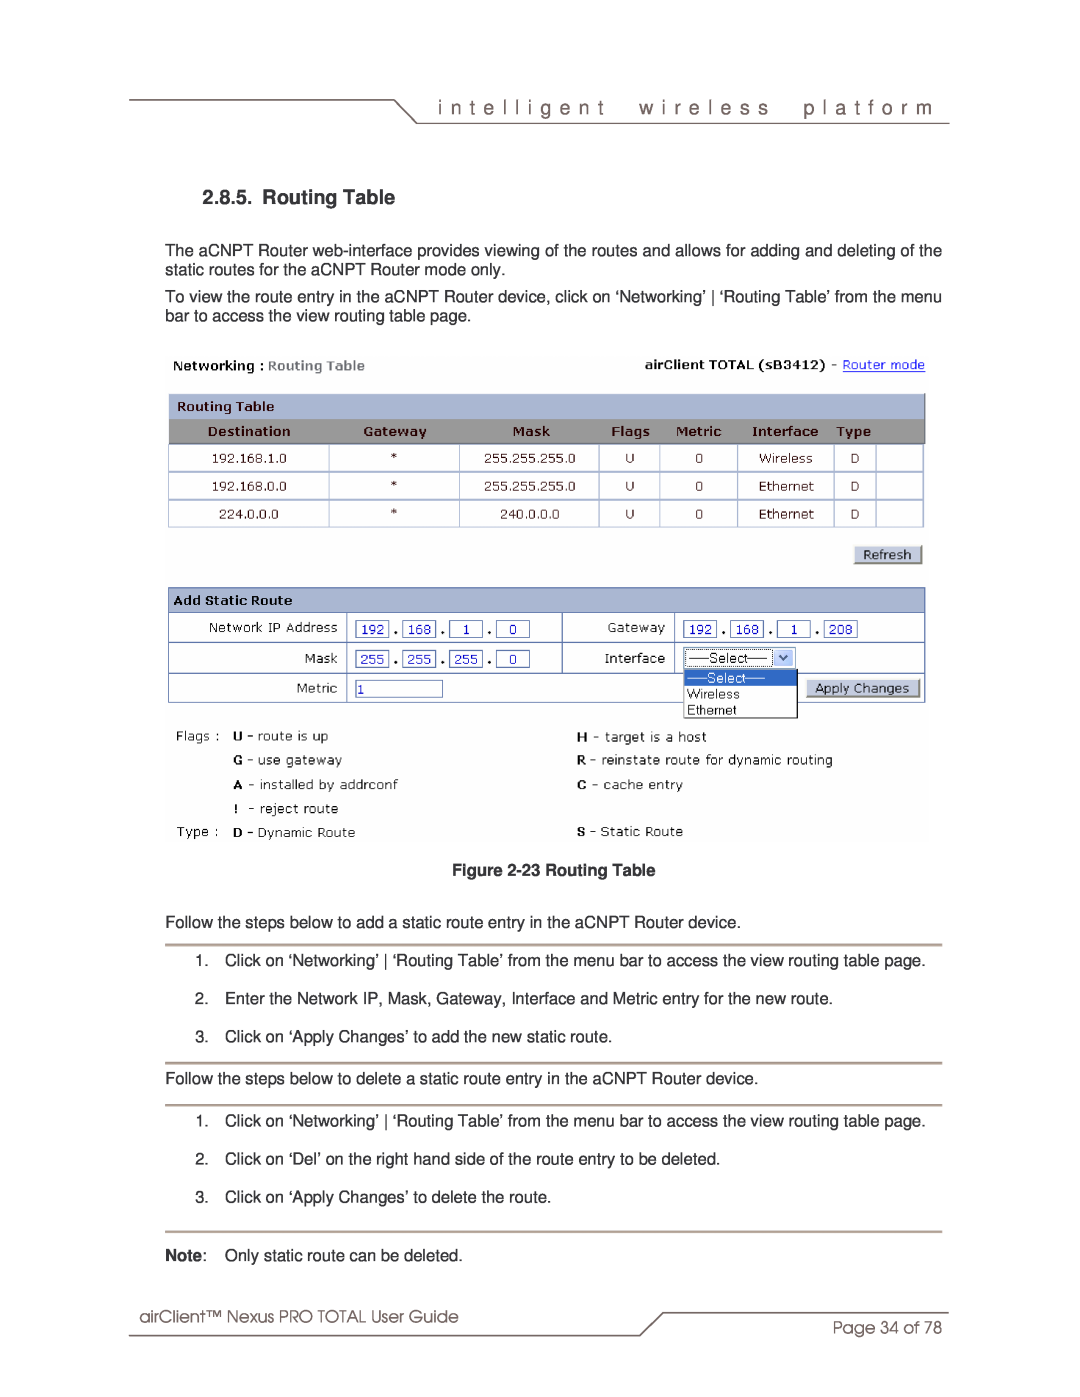 SmartBridges sB3412 manual i n t e l l i g e n t, w i r e l e s s, p l a t f o r m, 23Routing Table, Page 34 of 